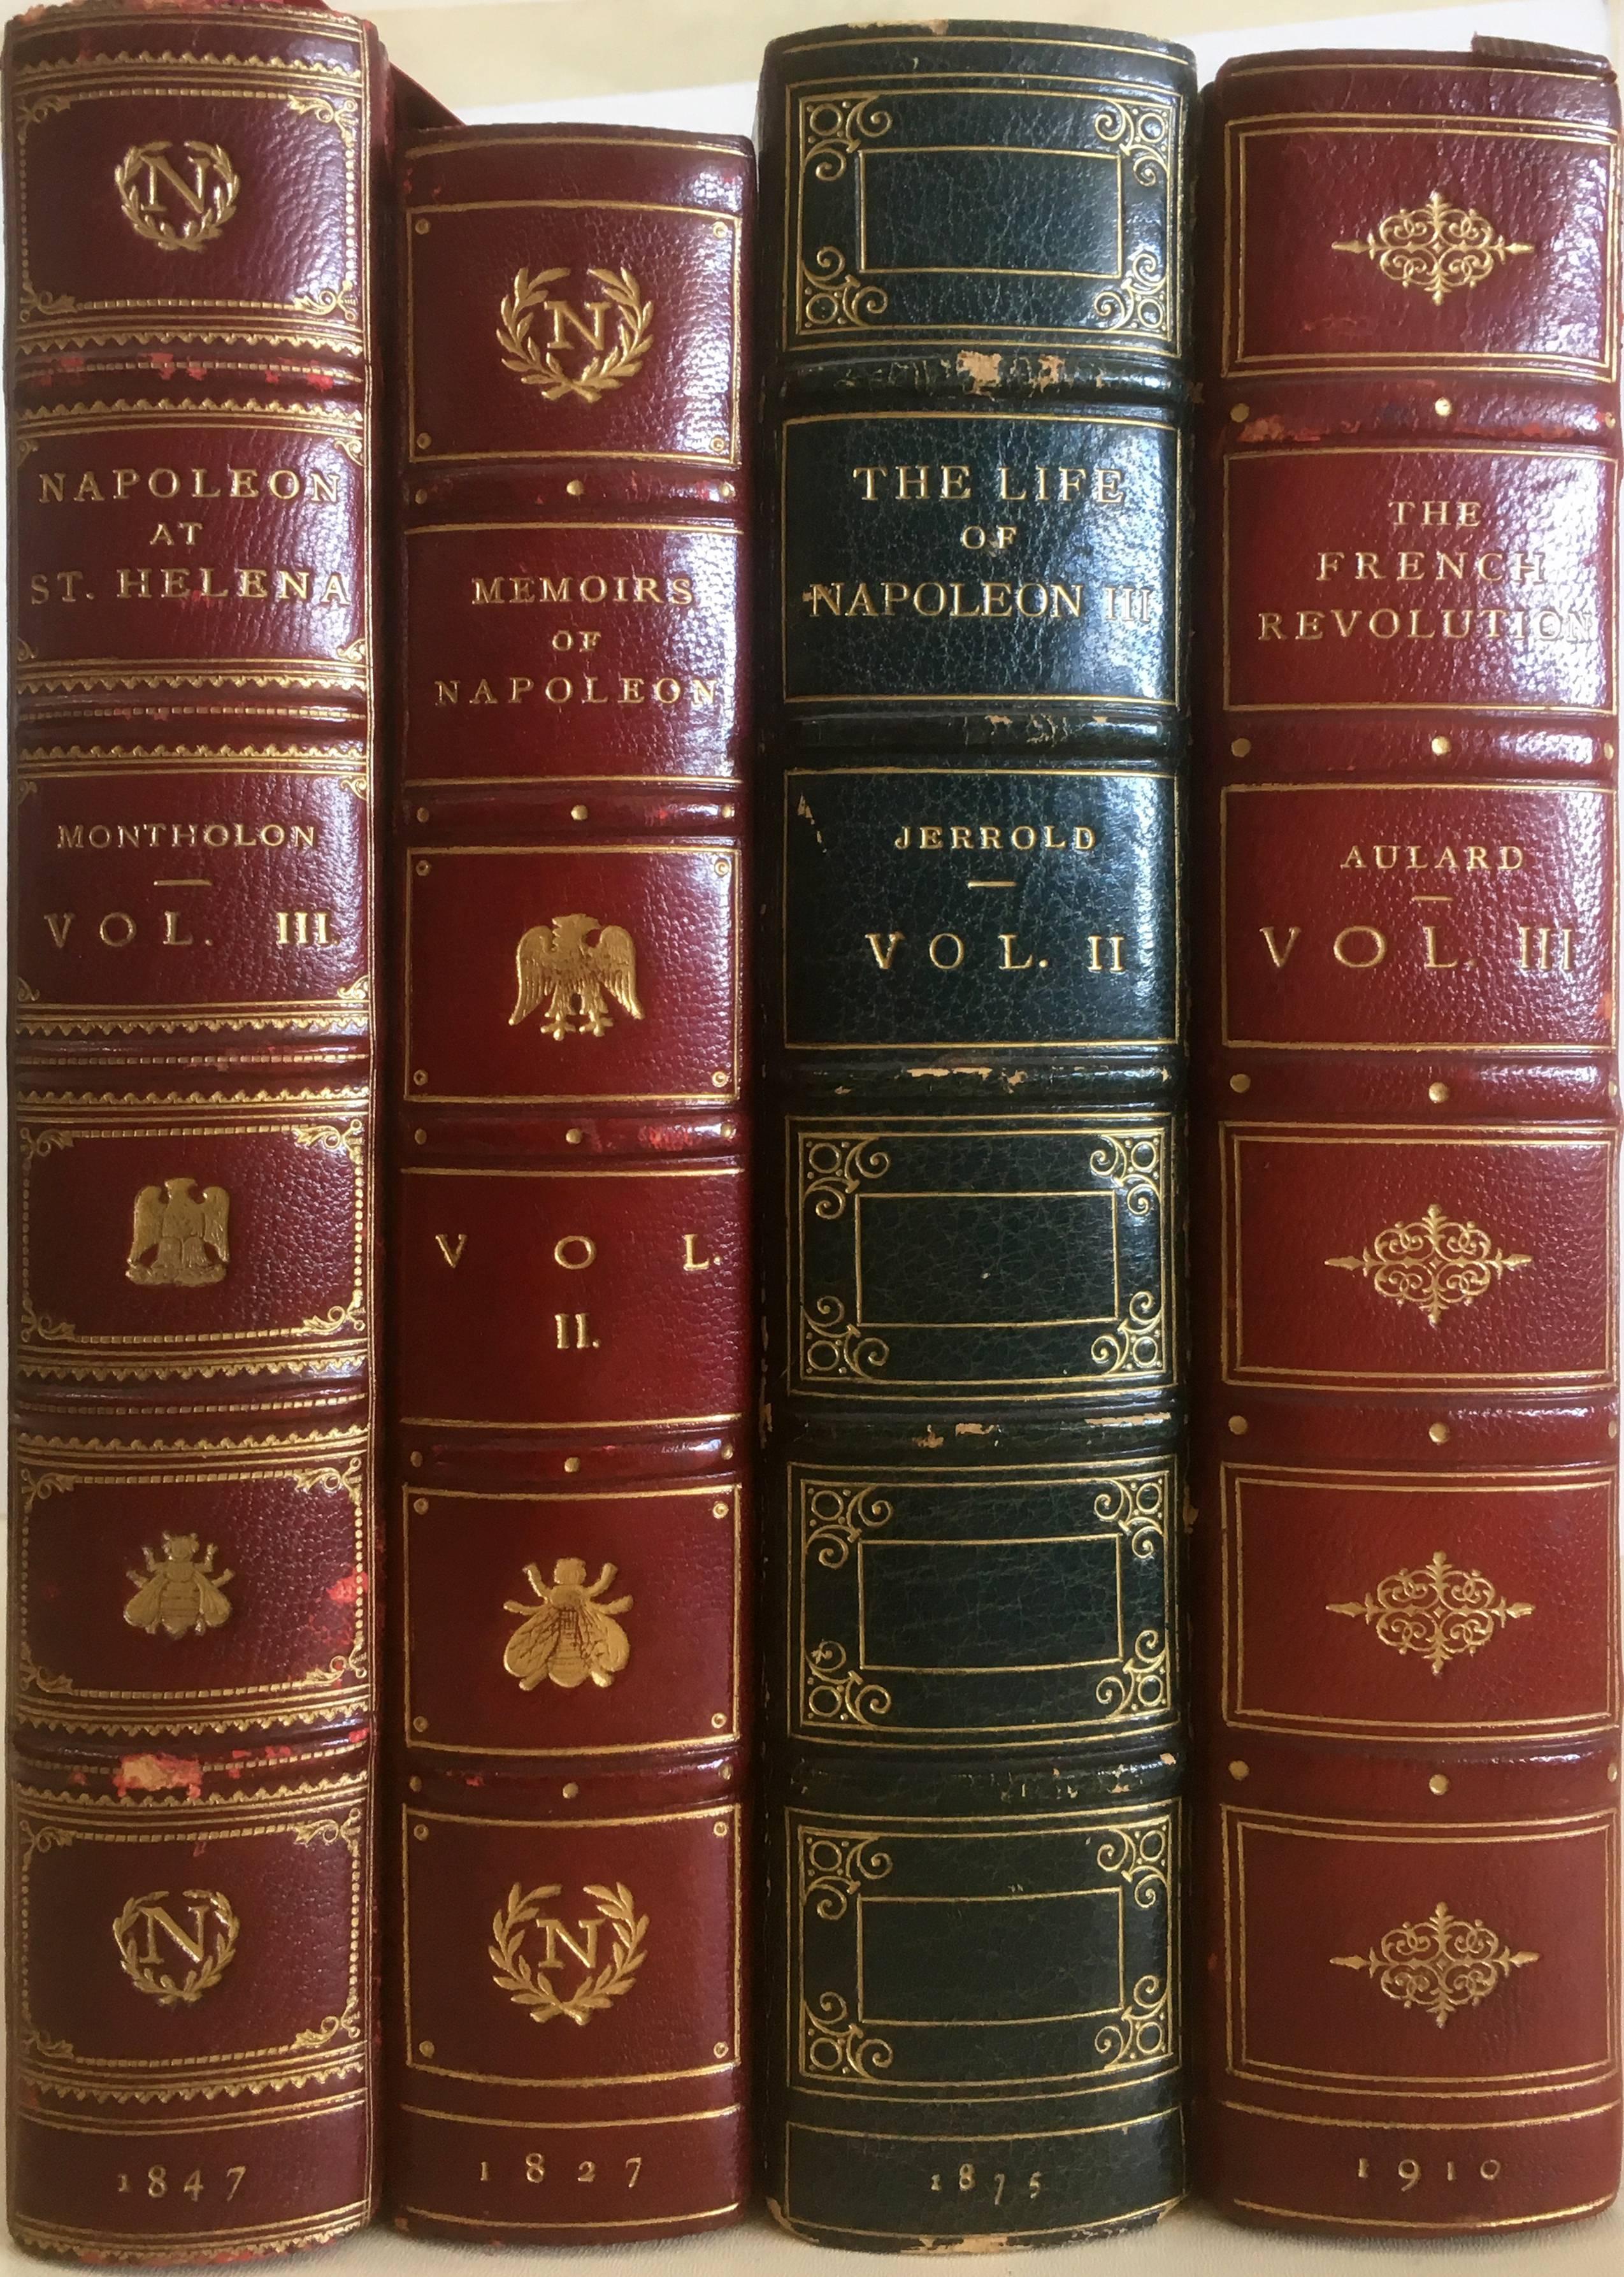  Napoleon Bonaparte: Assorted Book Collection From 1811 - 1924 12